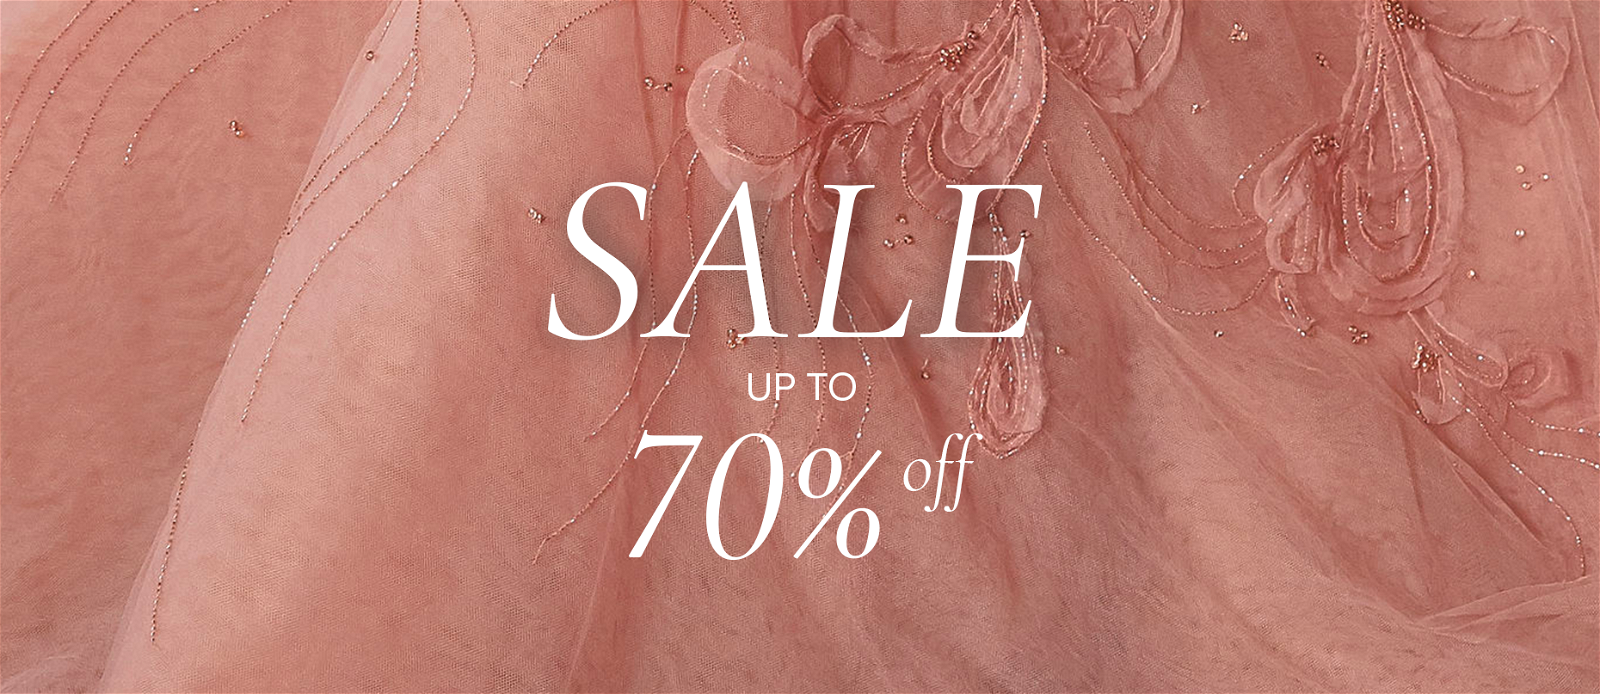 SALE UP TO 70% OFF